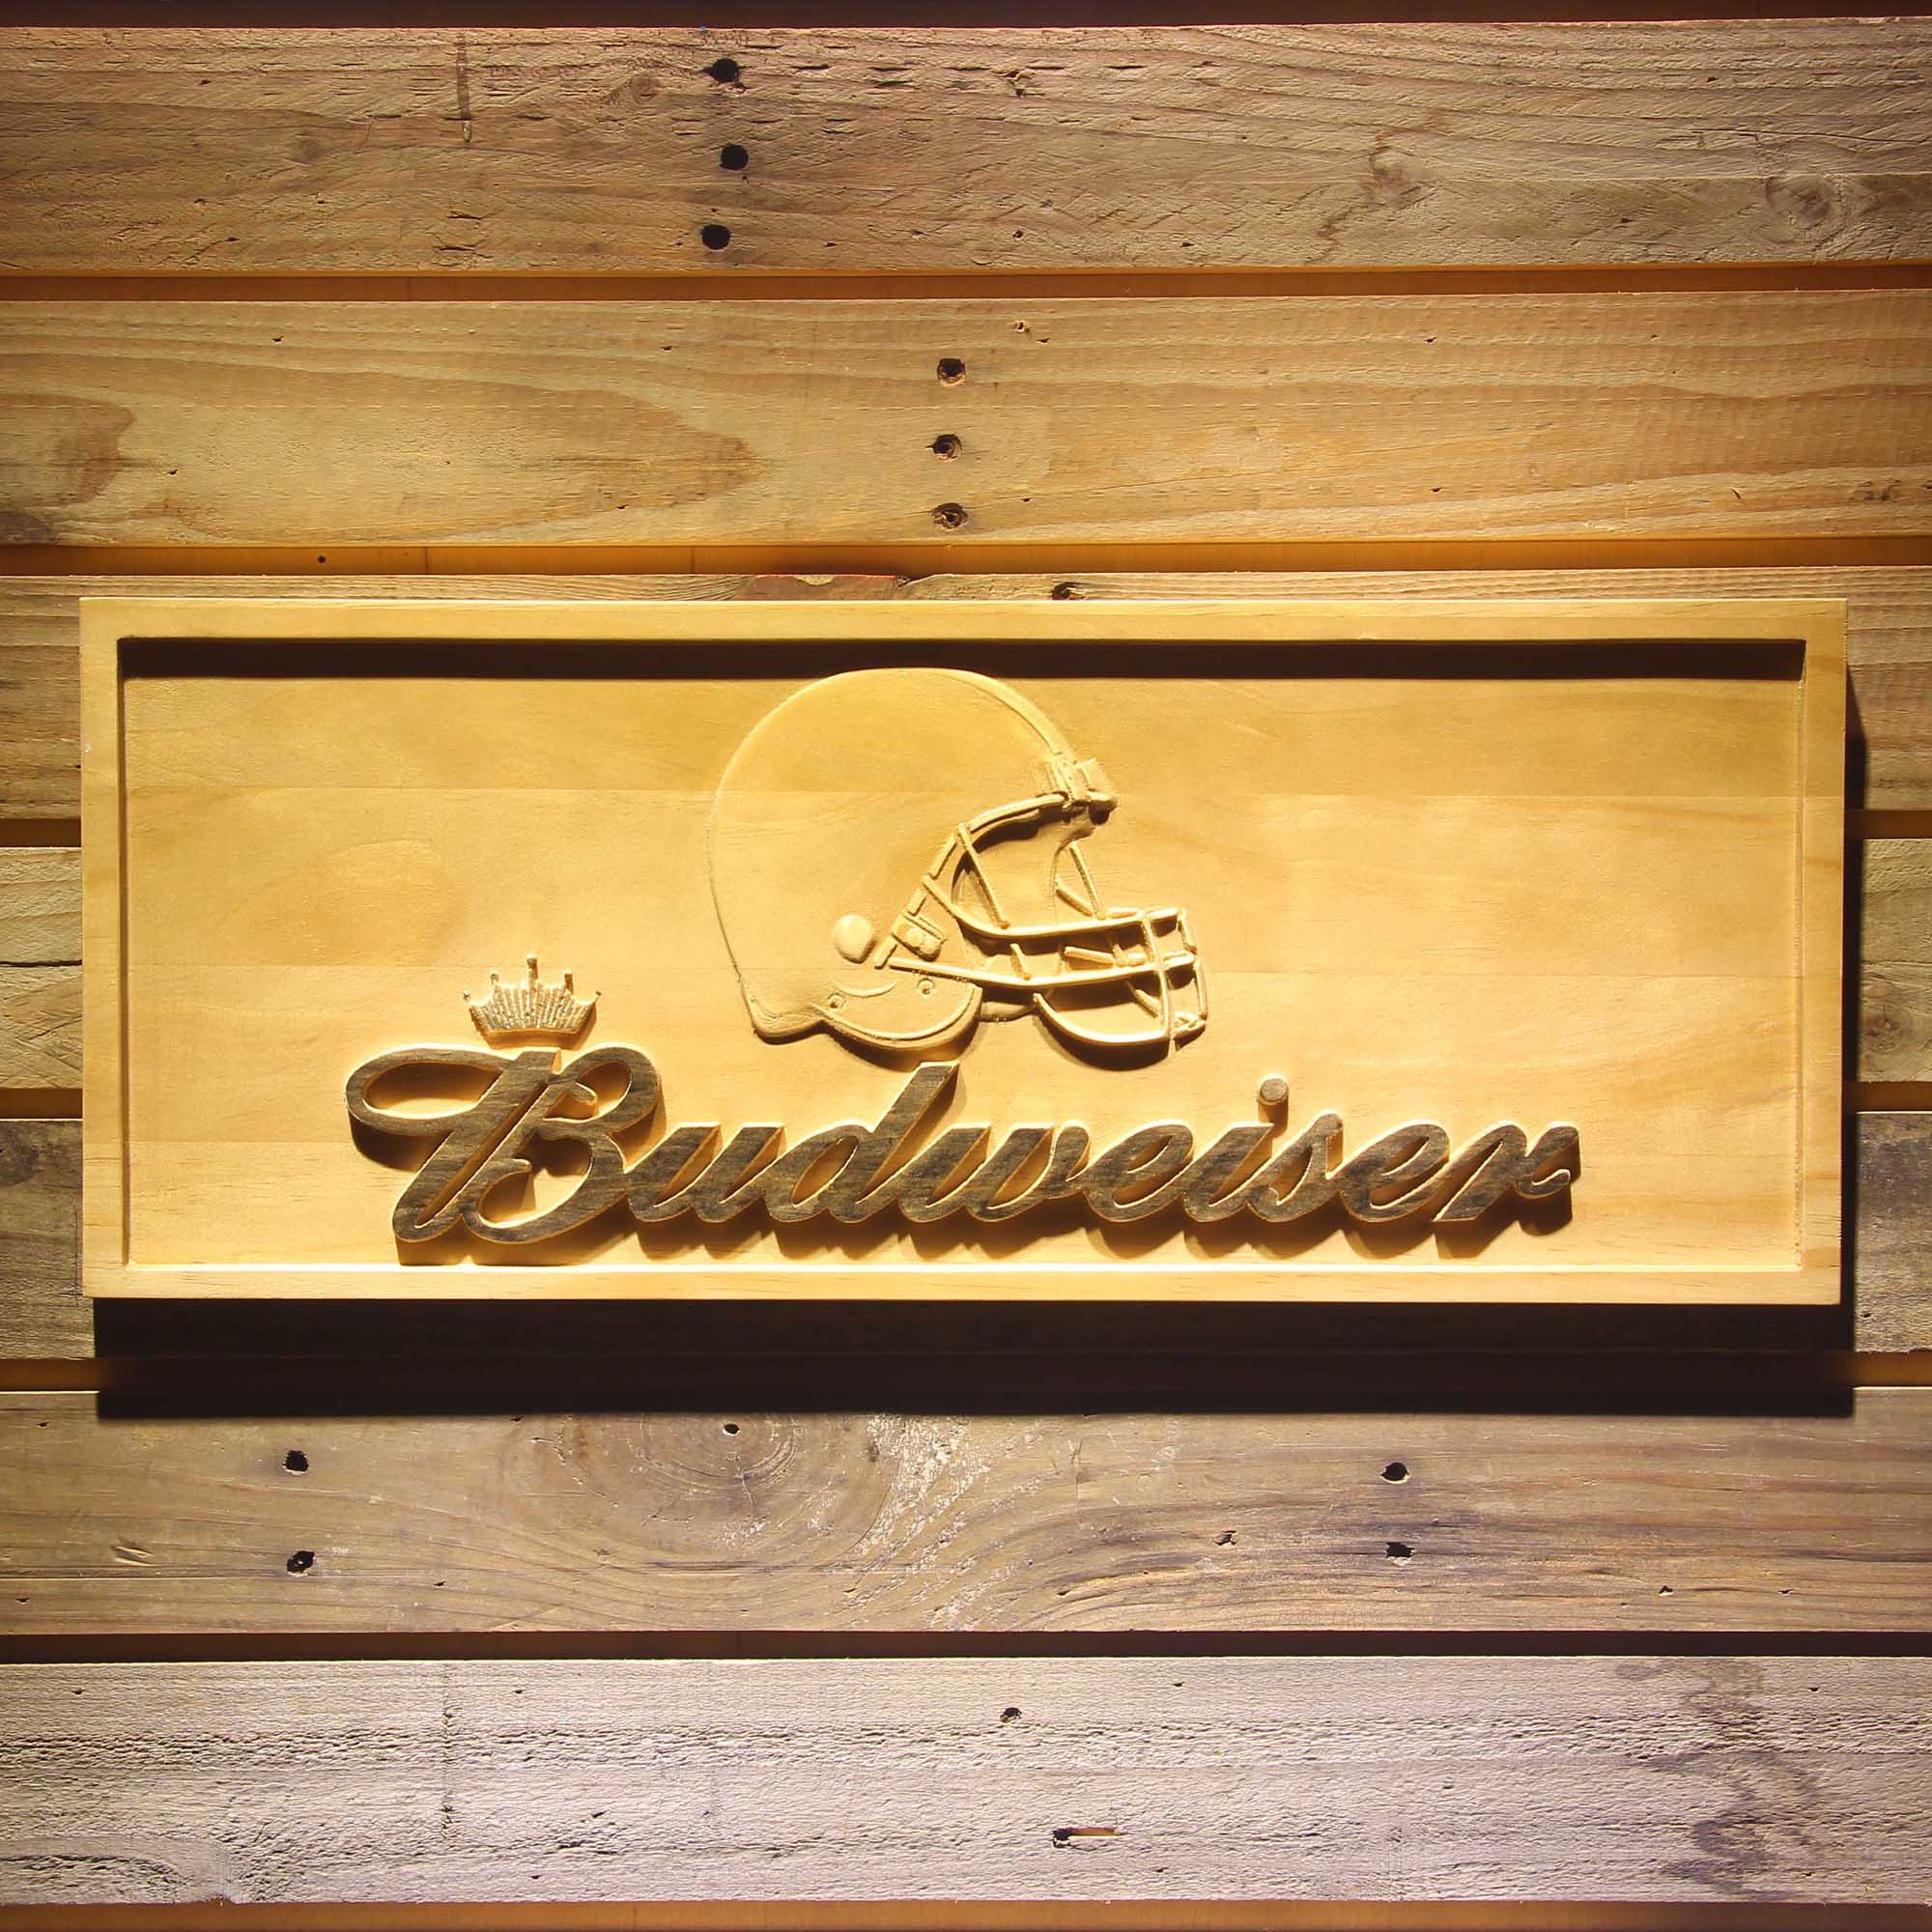 Cleveland Browns Budweiser 3D Solid Wooden Craving Sign